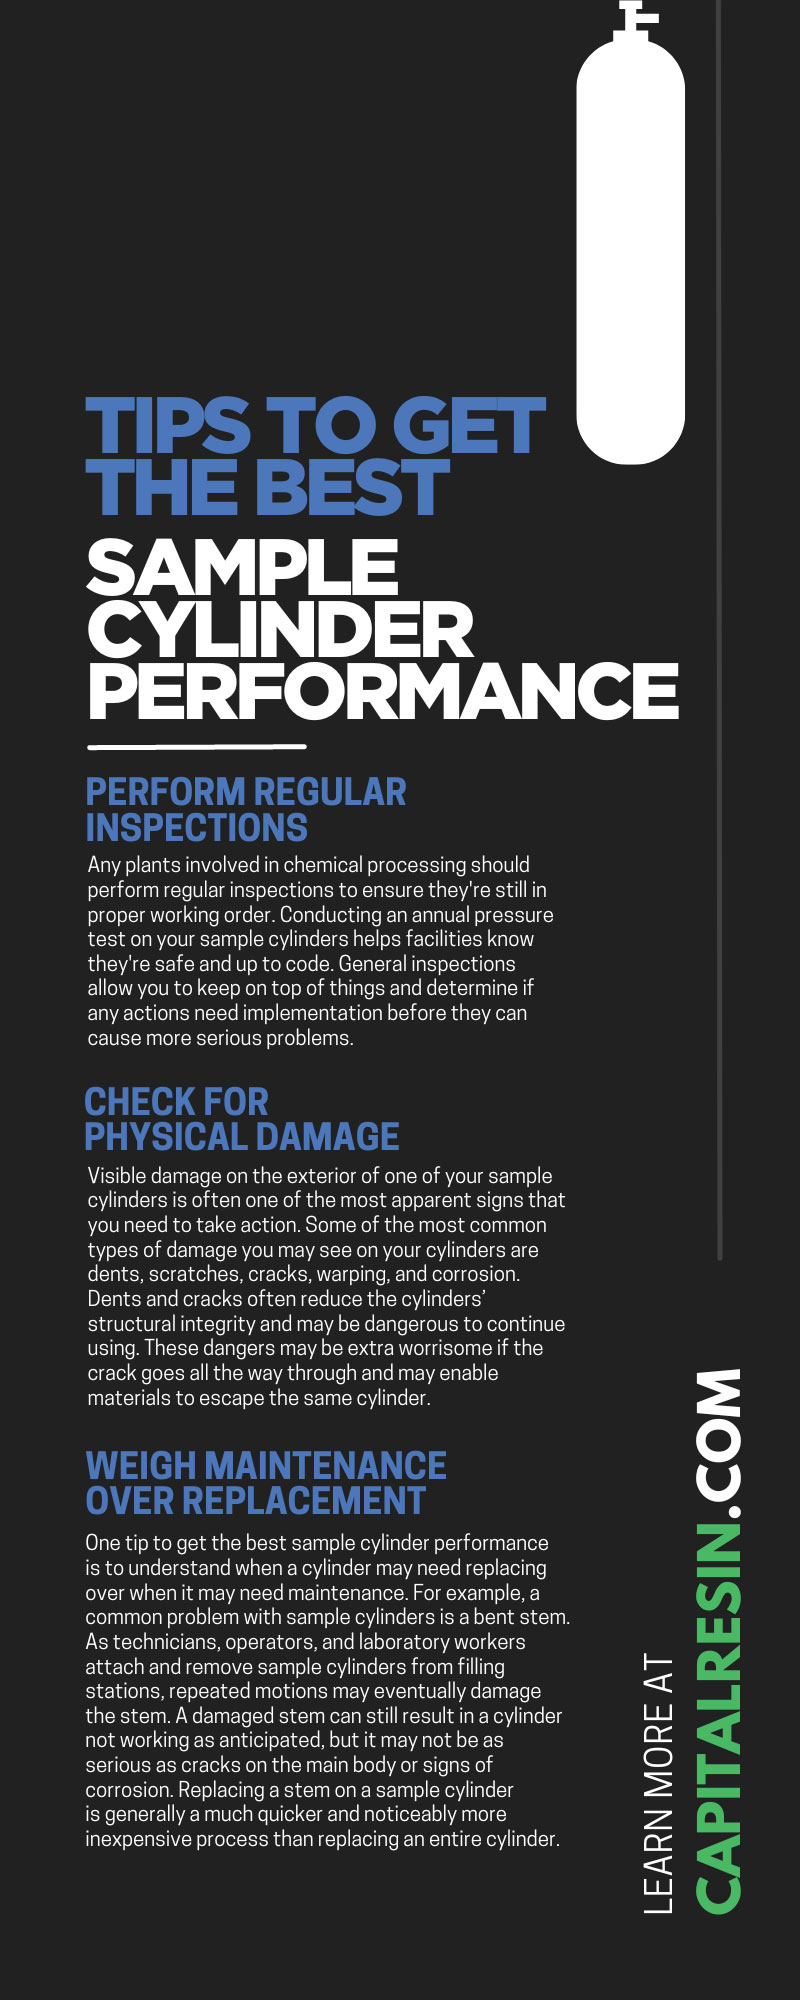 5 Tips To Get the Best Sample Cylinder Performance
